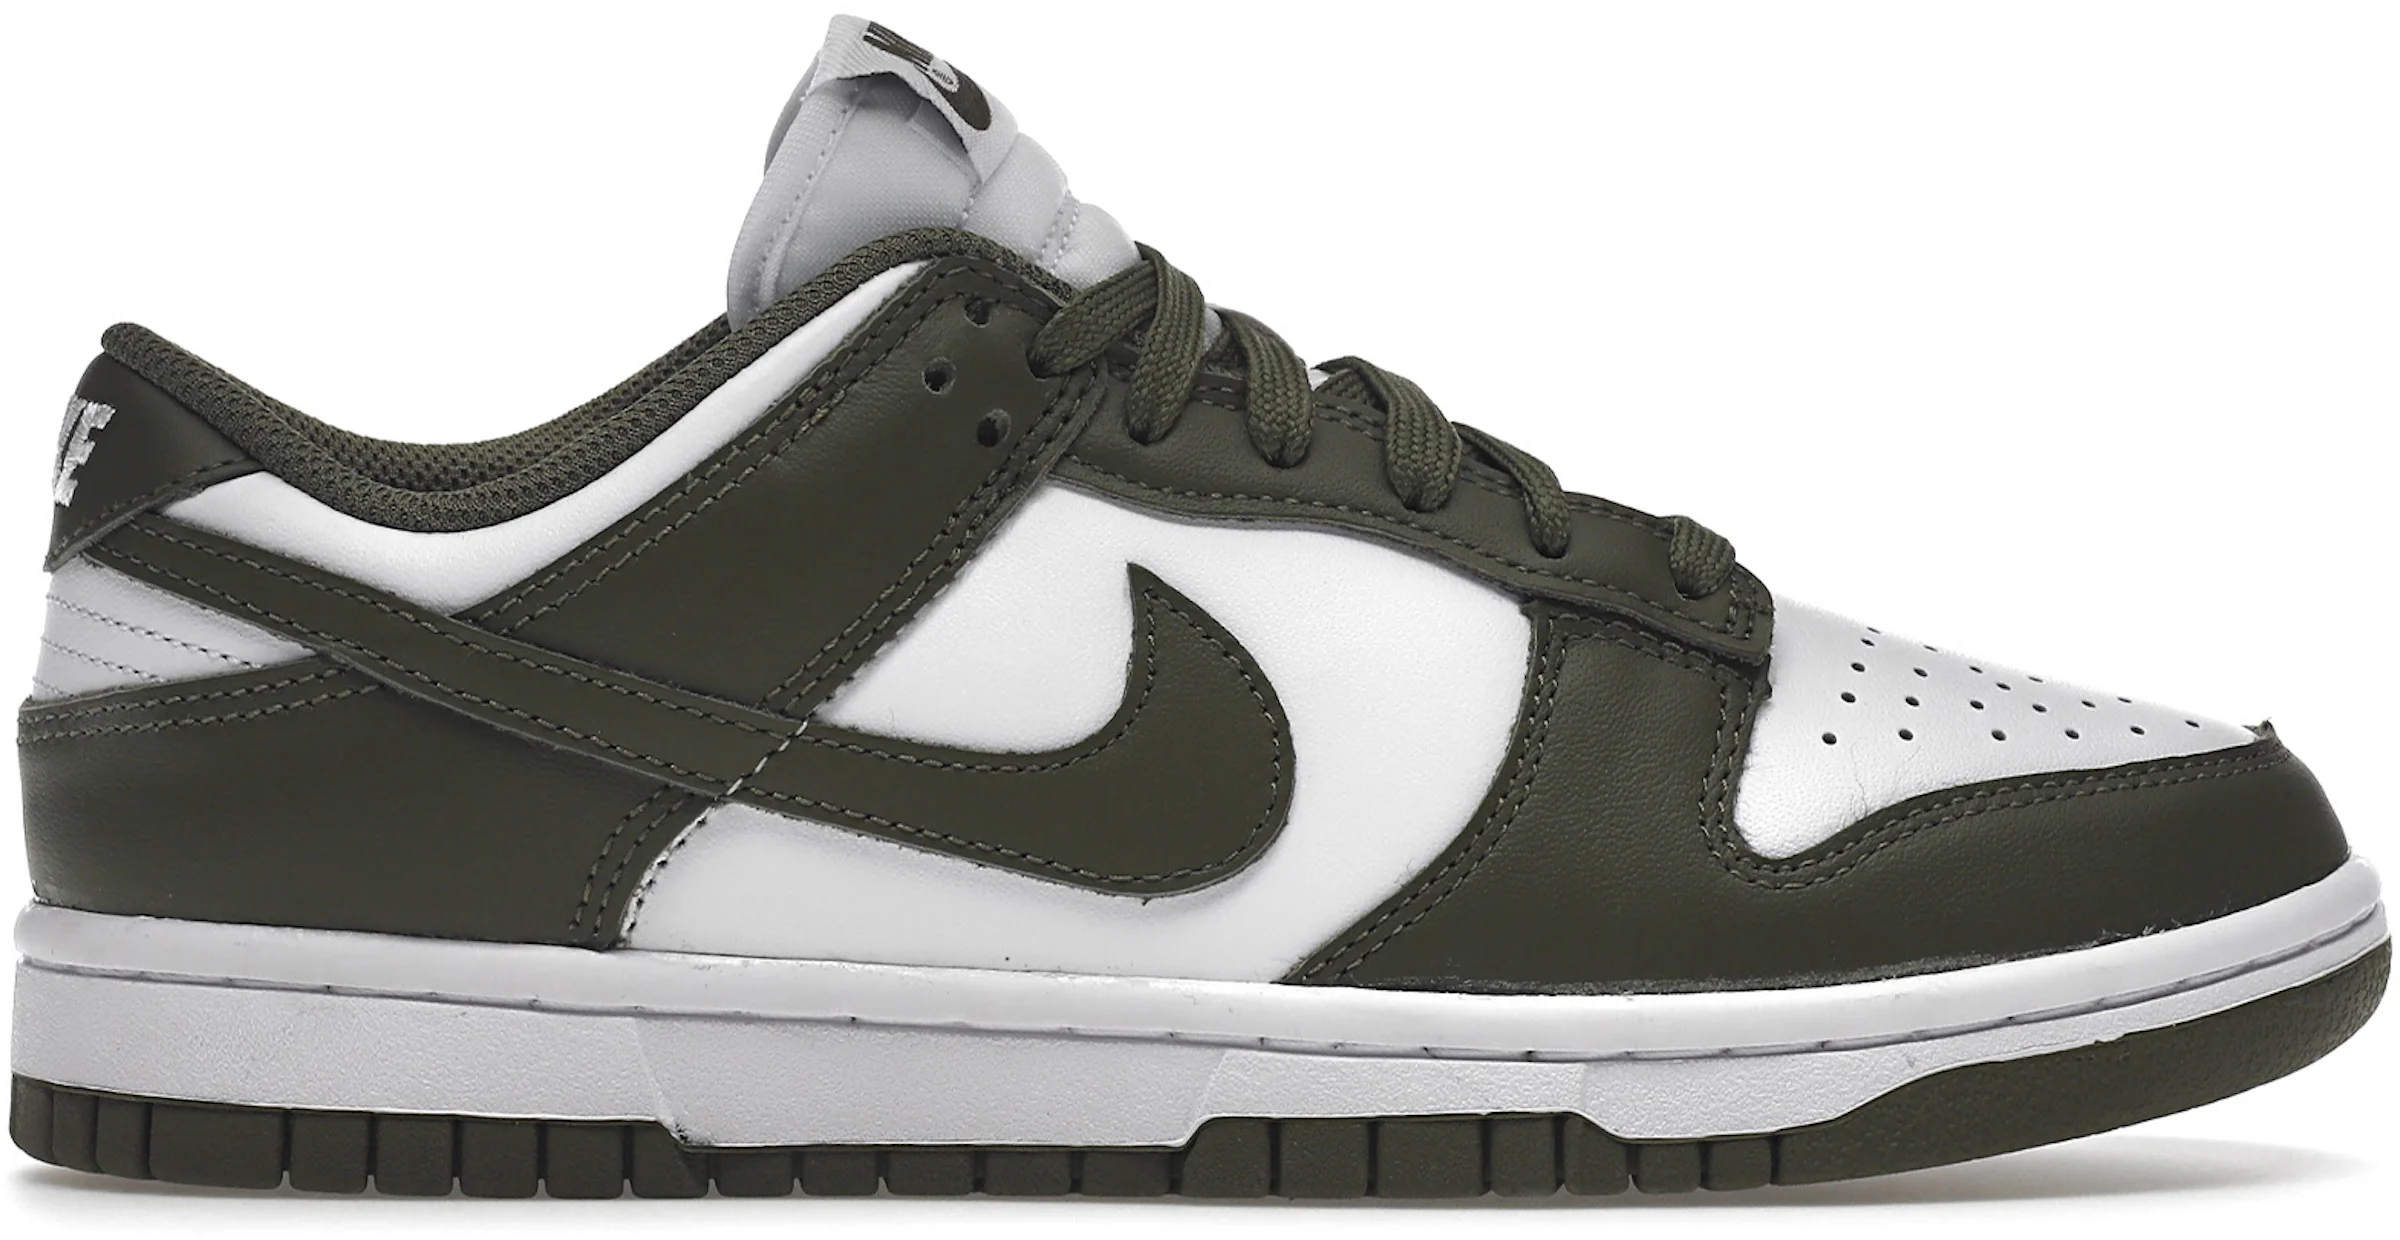 Wmns Nike Dunk Low 'Medium Olive' – The Sneaker CA